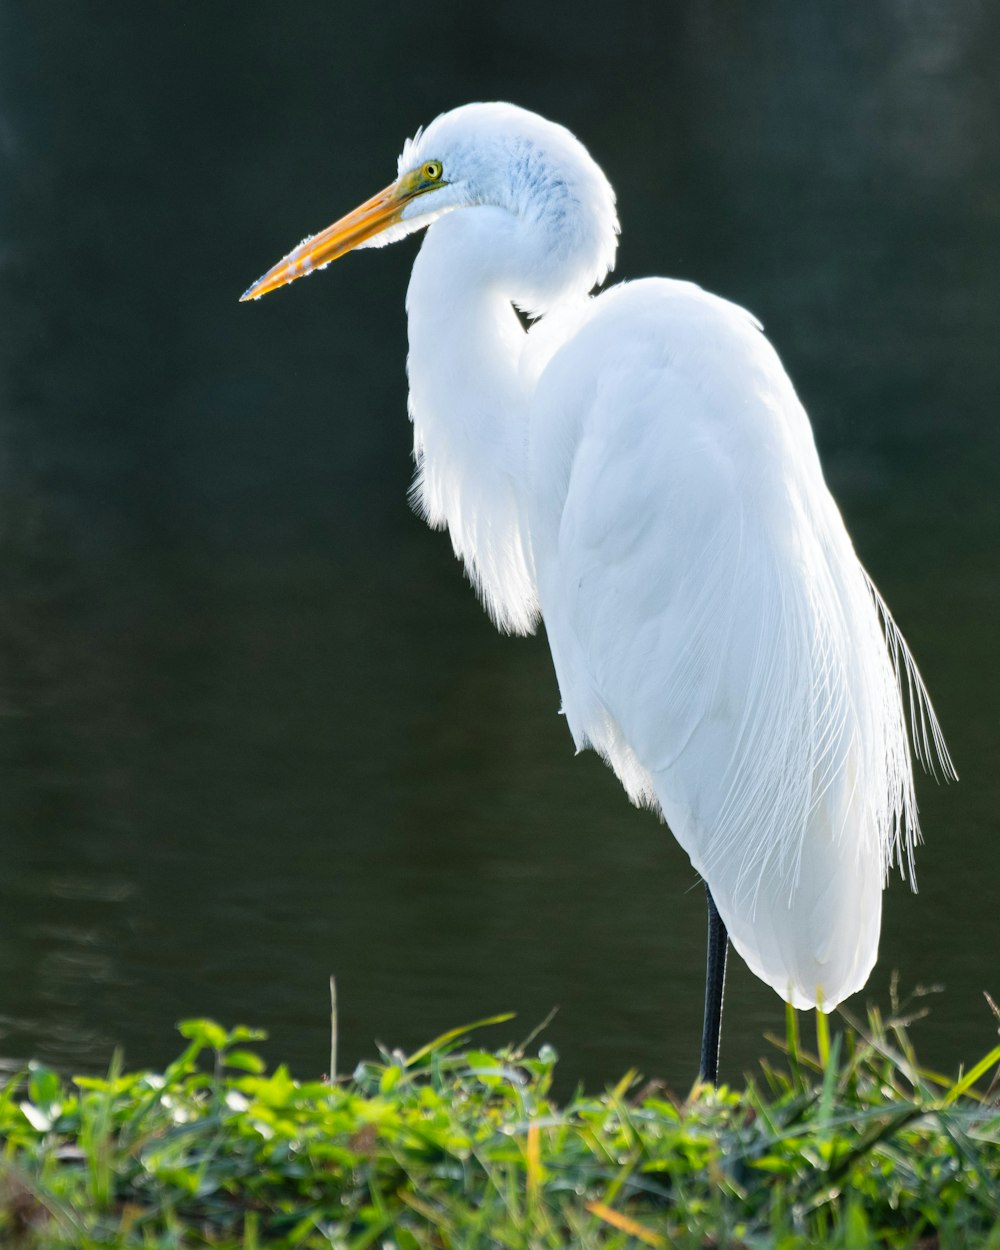 a white bird with a long neck standing on a grass covered bank